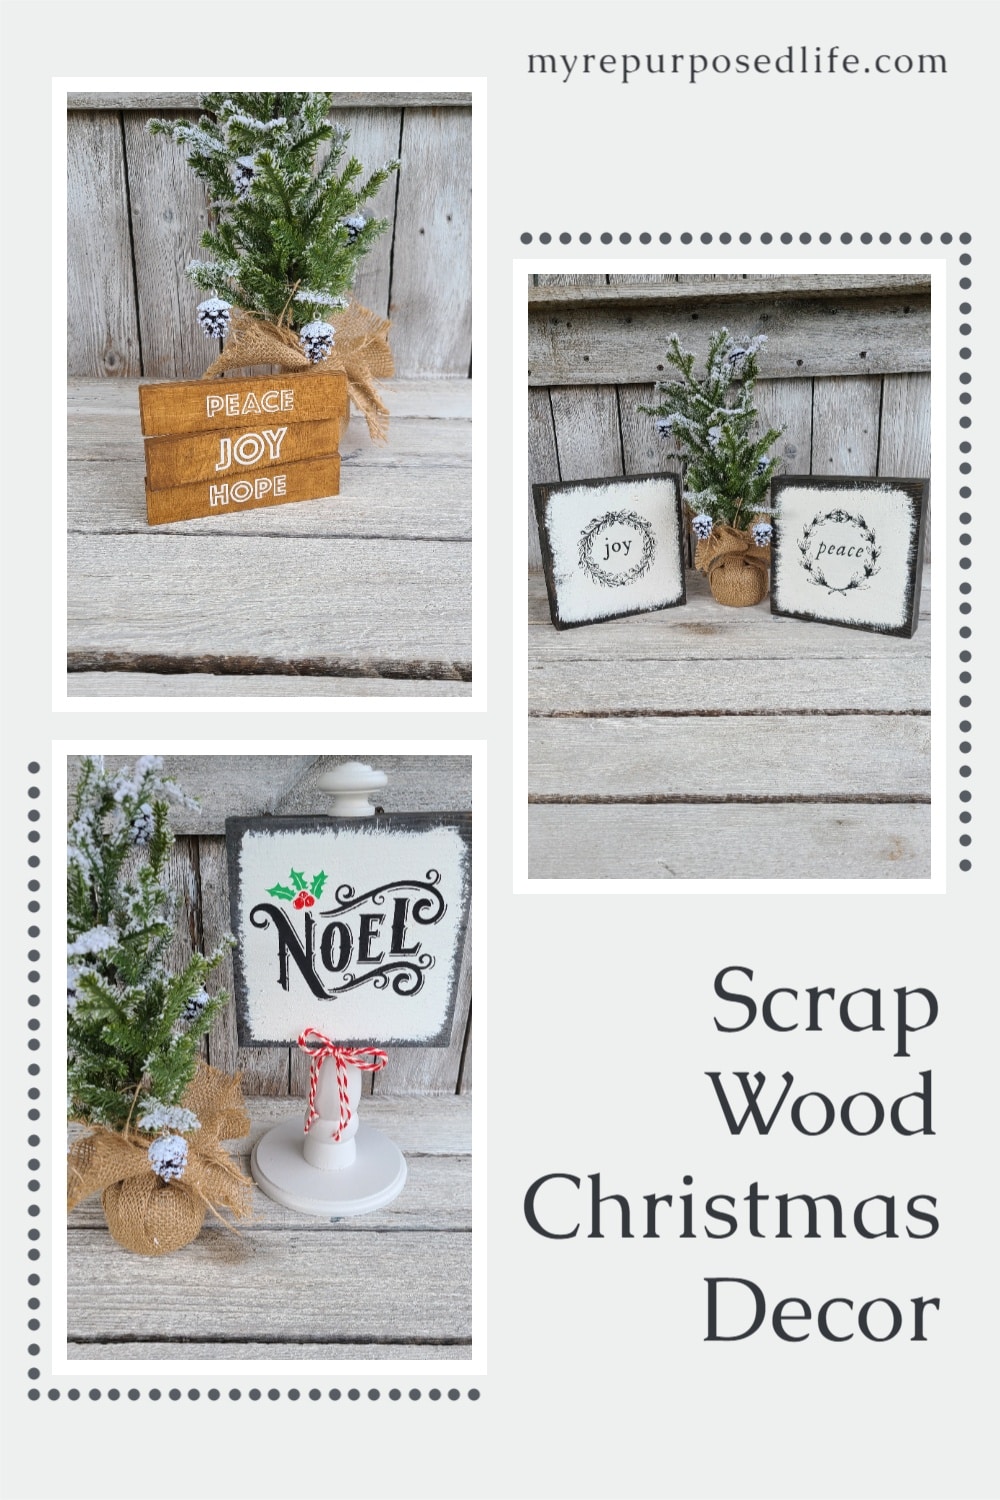 How to make scrap wood Christmas decor projects for your home, or as gifts for friends, neighbors teachers and more. Easy details included. #MyRepurposedLife #repurposed #Christmas #decor #scrapwood #projects #diy via @repurposedlife